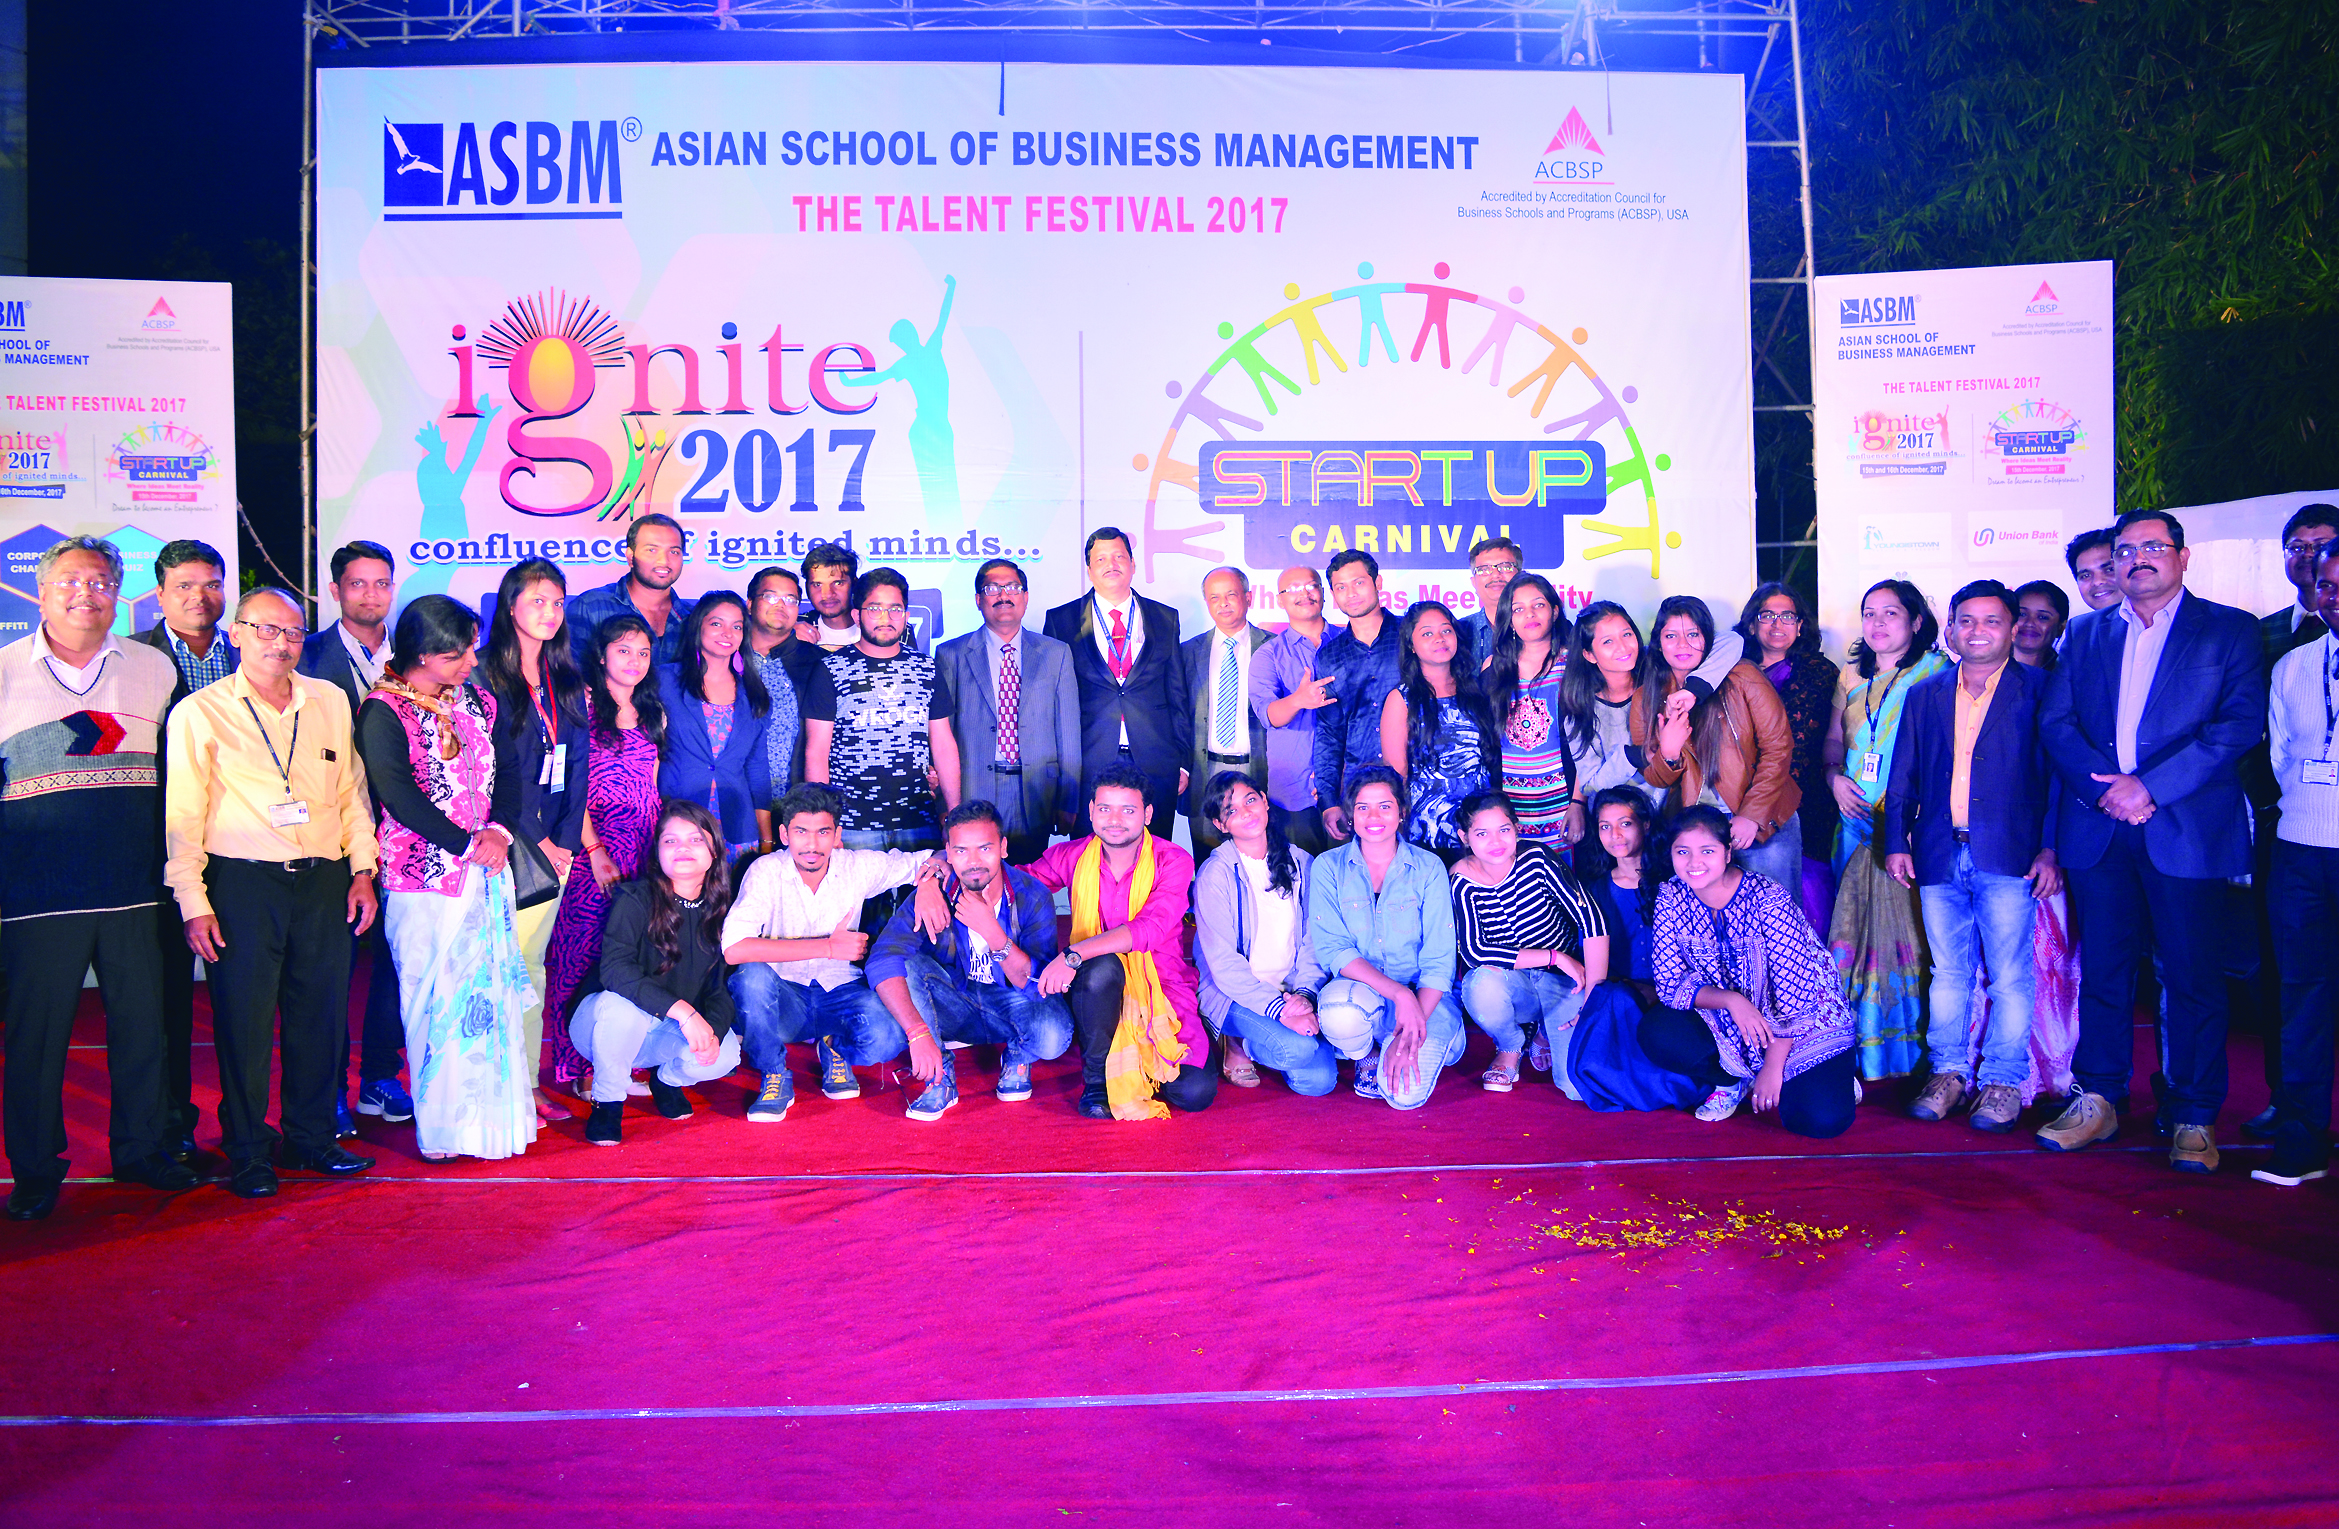 Asbm Talent Festival ‘Startup’ Carnival and ‘Ignite’ – 2017 Celebrated